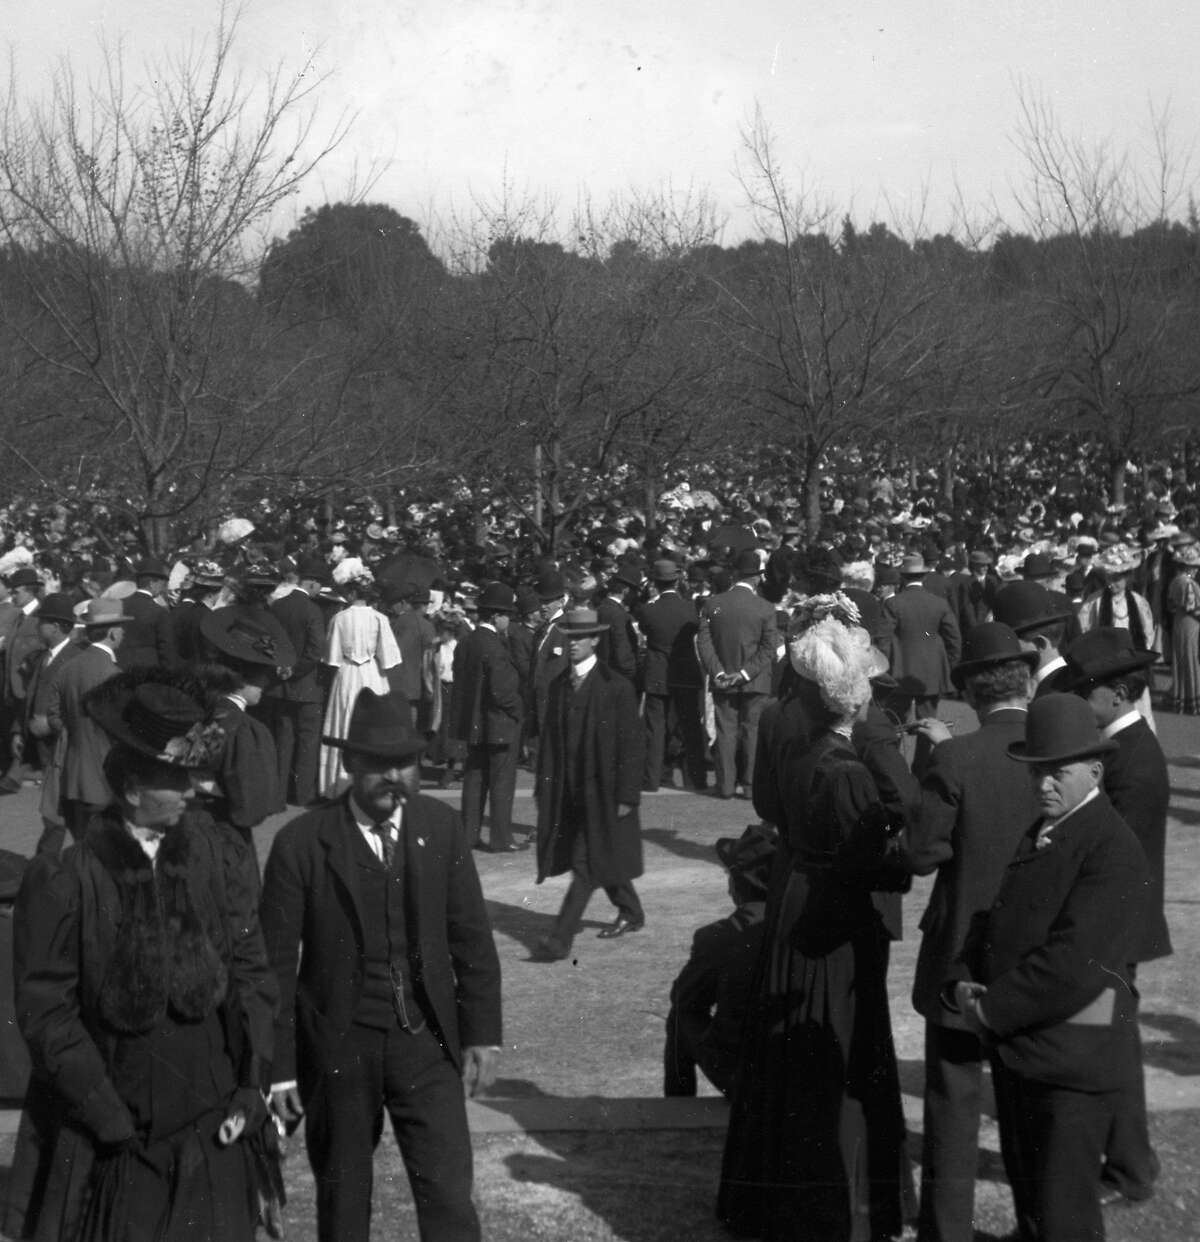 A crowd gathers in Golden Gate Park sometime after the 1906 earthquake and fire.